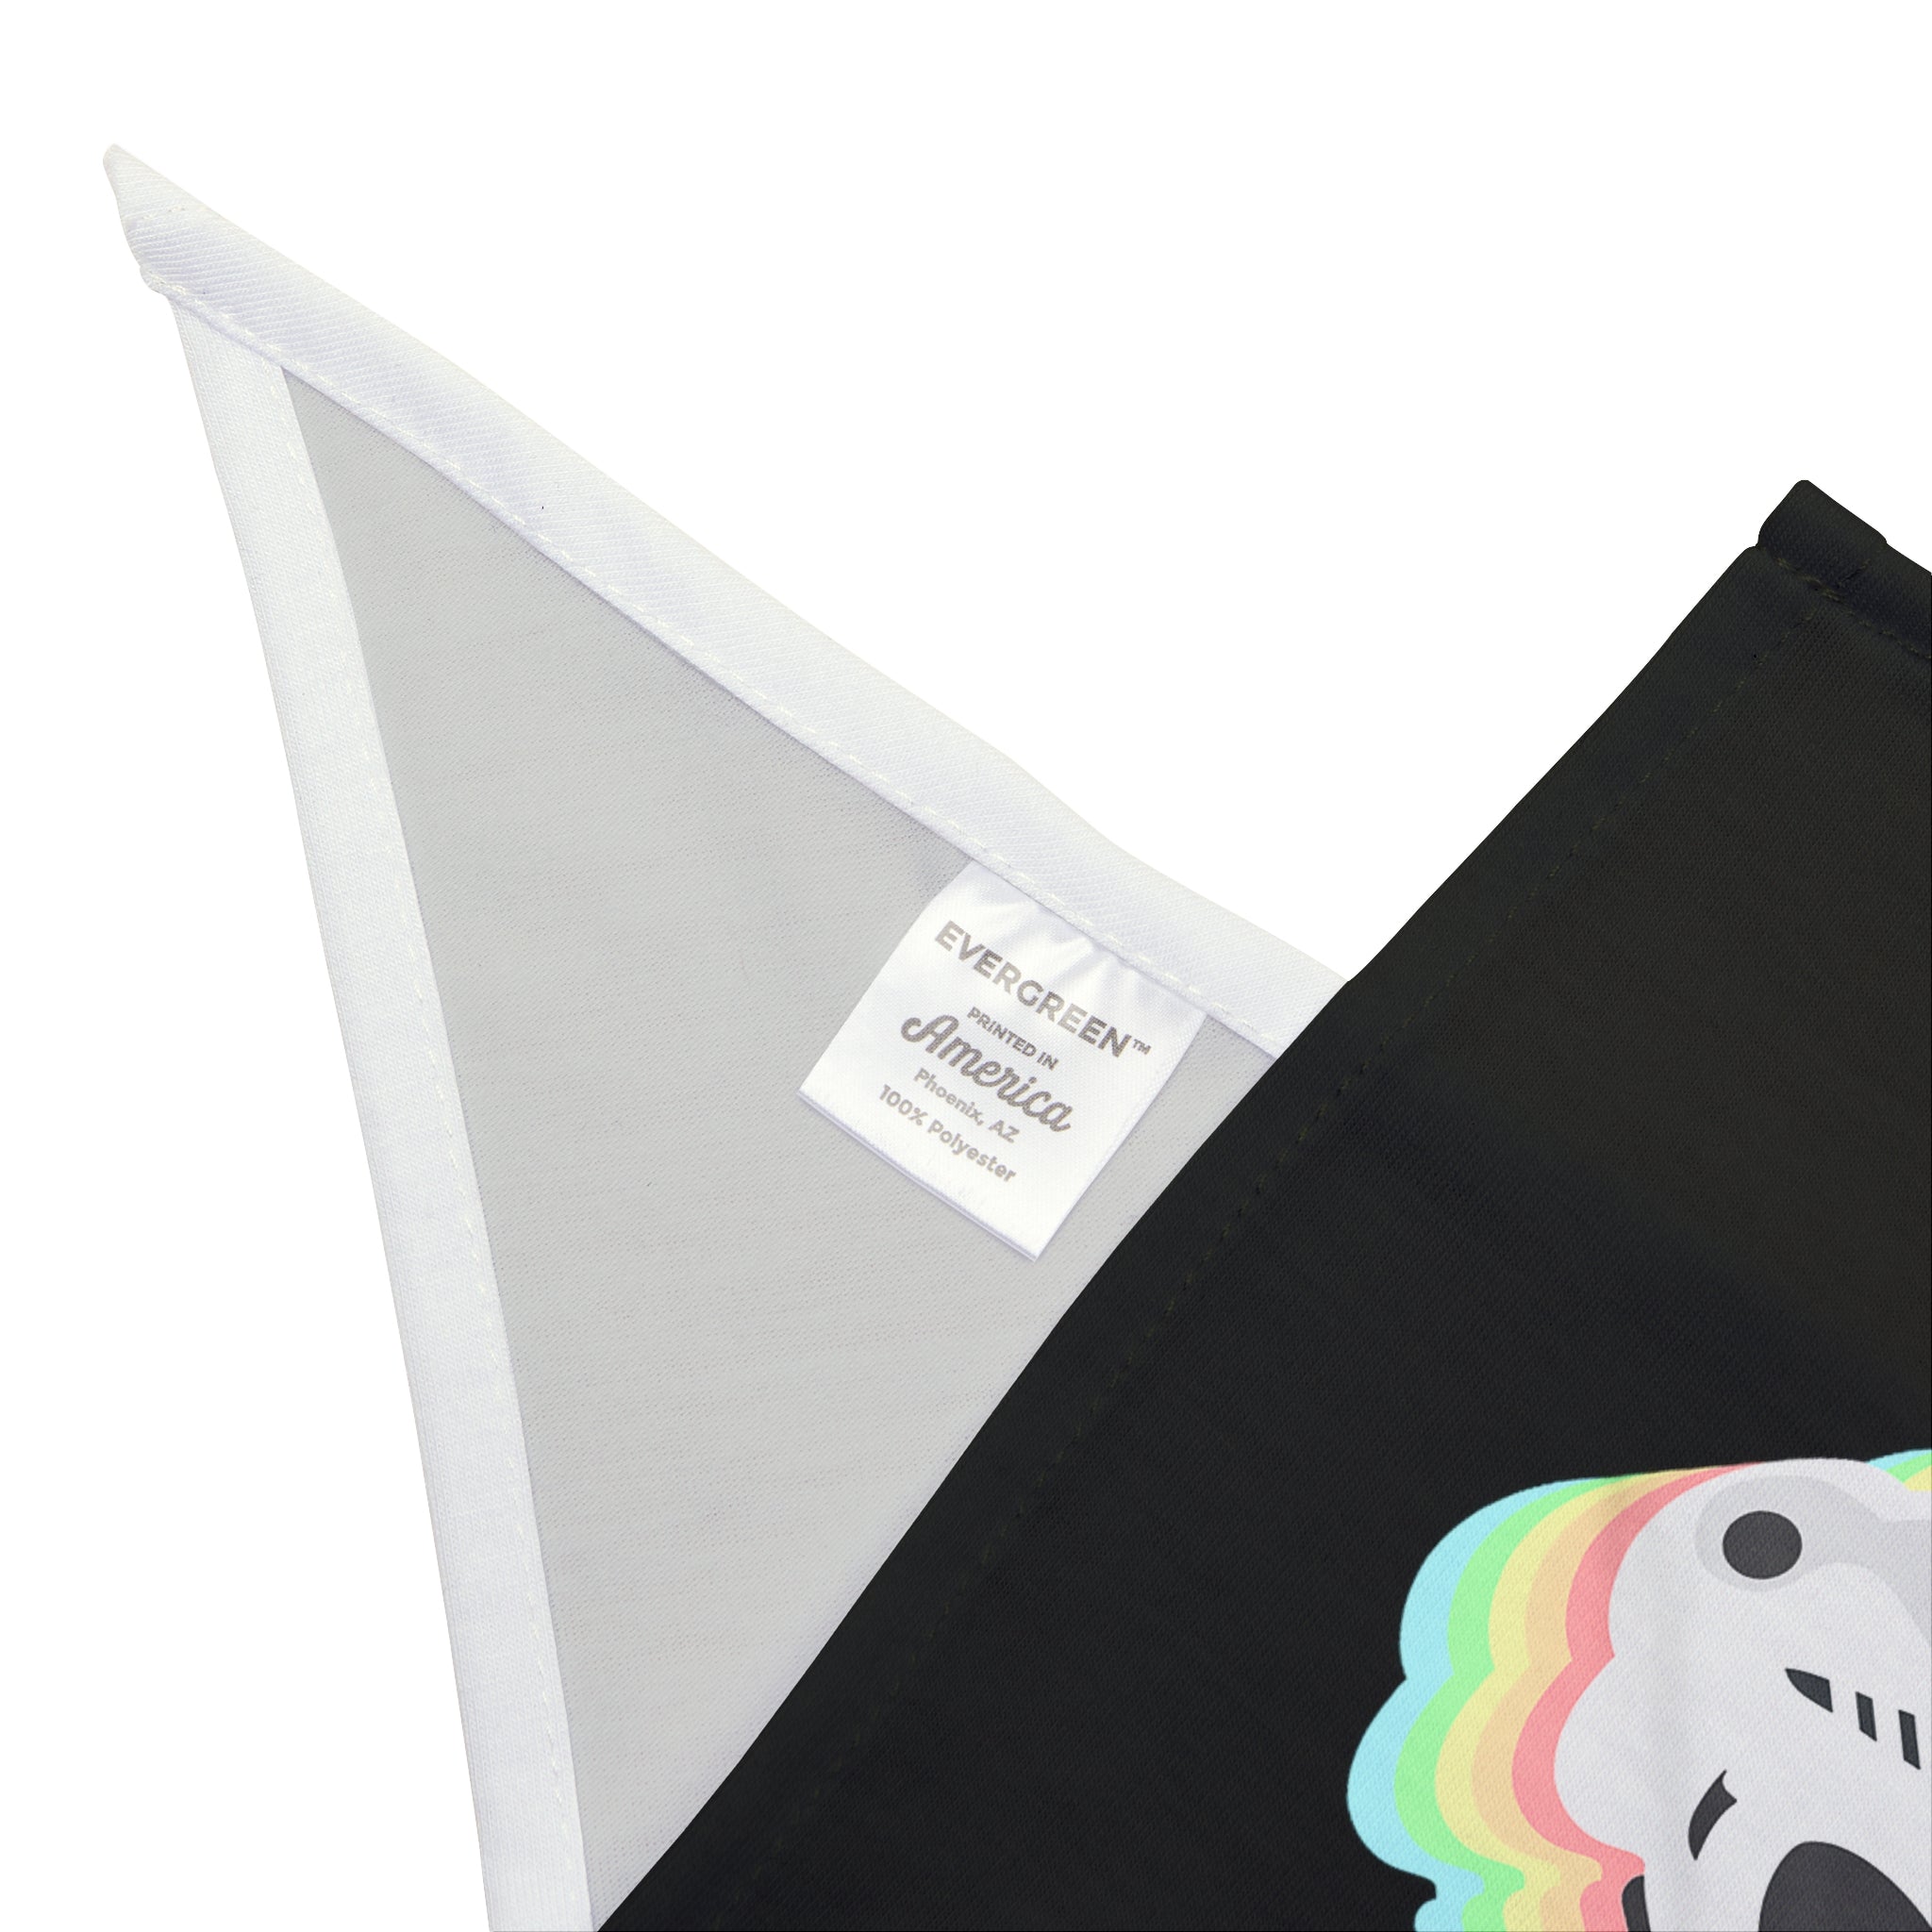 An Evergreen America product tag displayed on a black fabric pet bandana with a section of a colorful design visible, featuring a Star Wars Easter Stormtrooper - Pet Bandana.